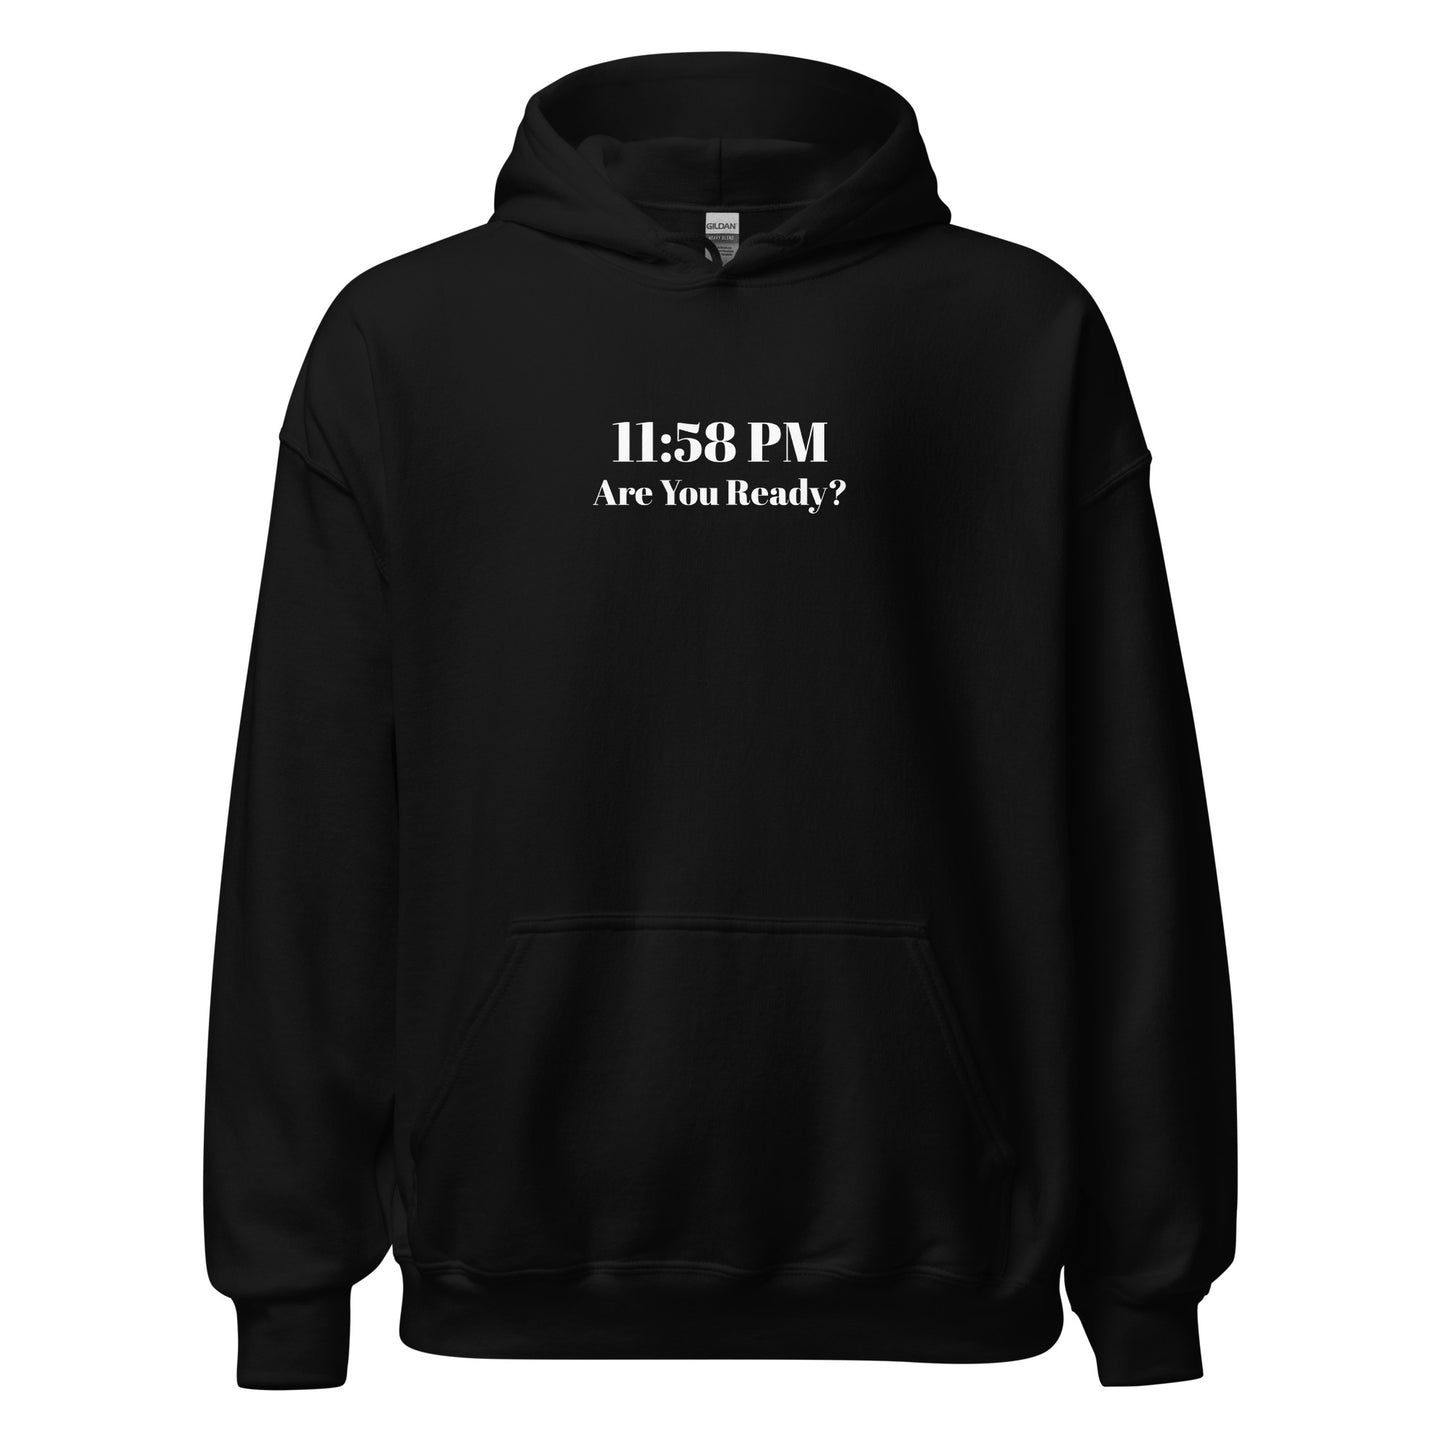 11:58 PM Are You Ready? Unisex Hoodie 2